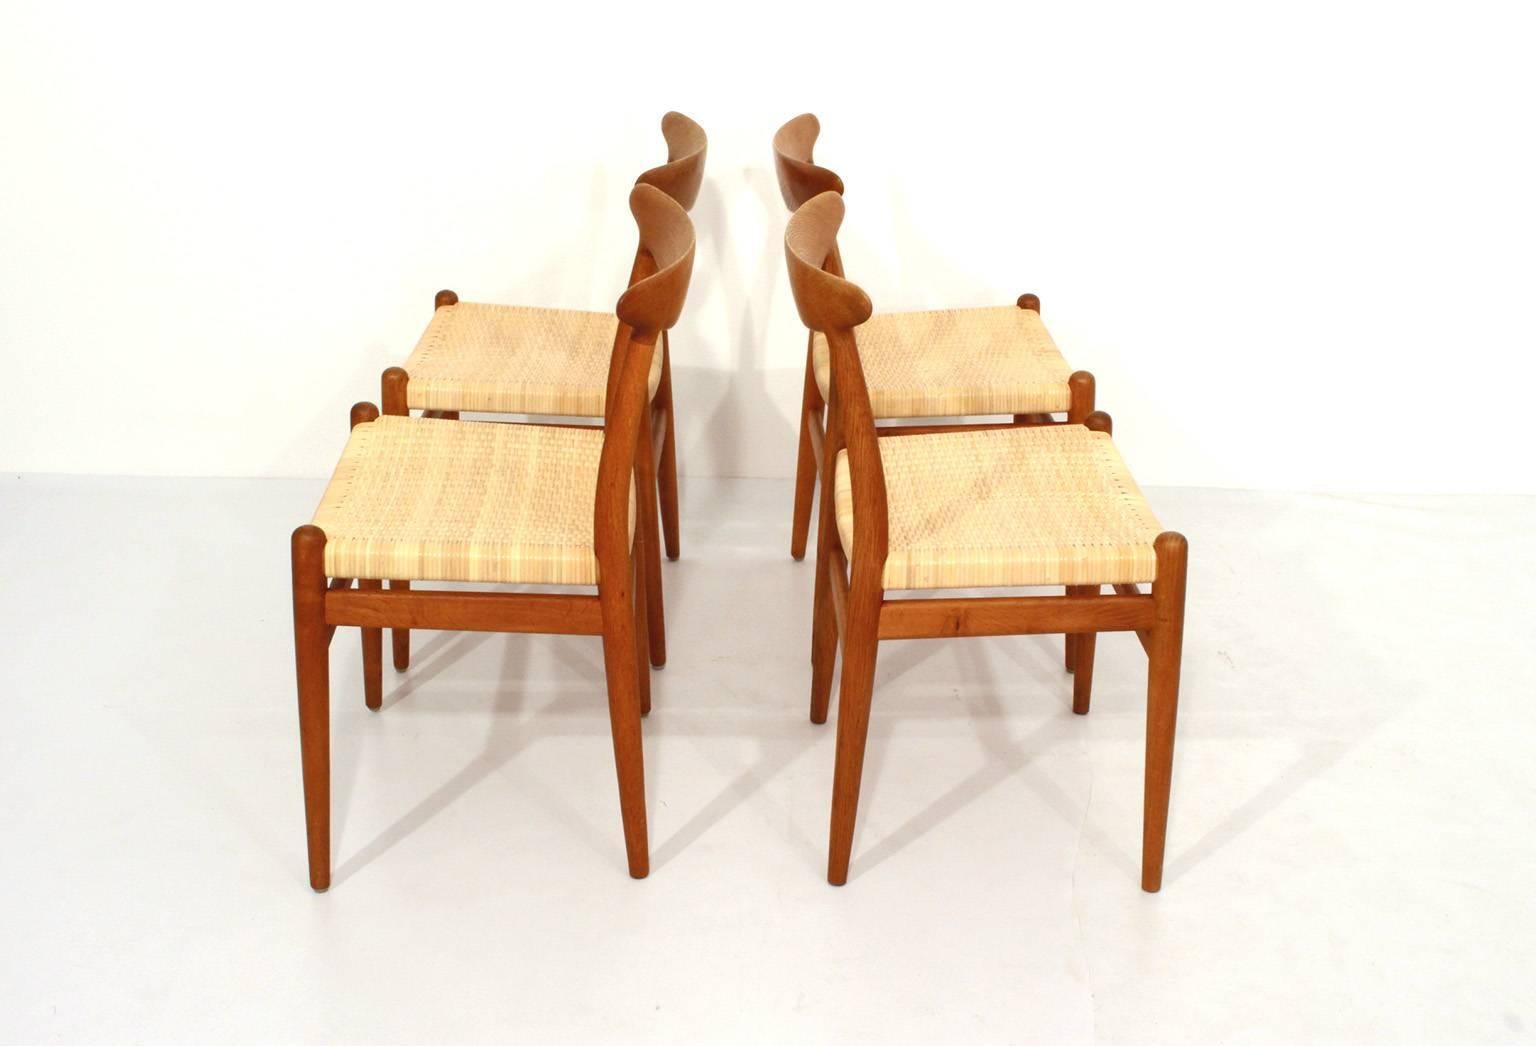 A set of four dining chairs, model W2.
Design Hans J Wegner, 1953. Made by CM Madsen, Denmark.
Solid oak with fine patina, seats with new woven rattan.